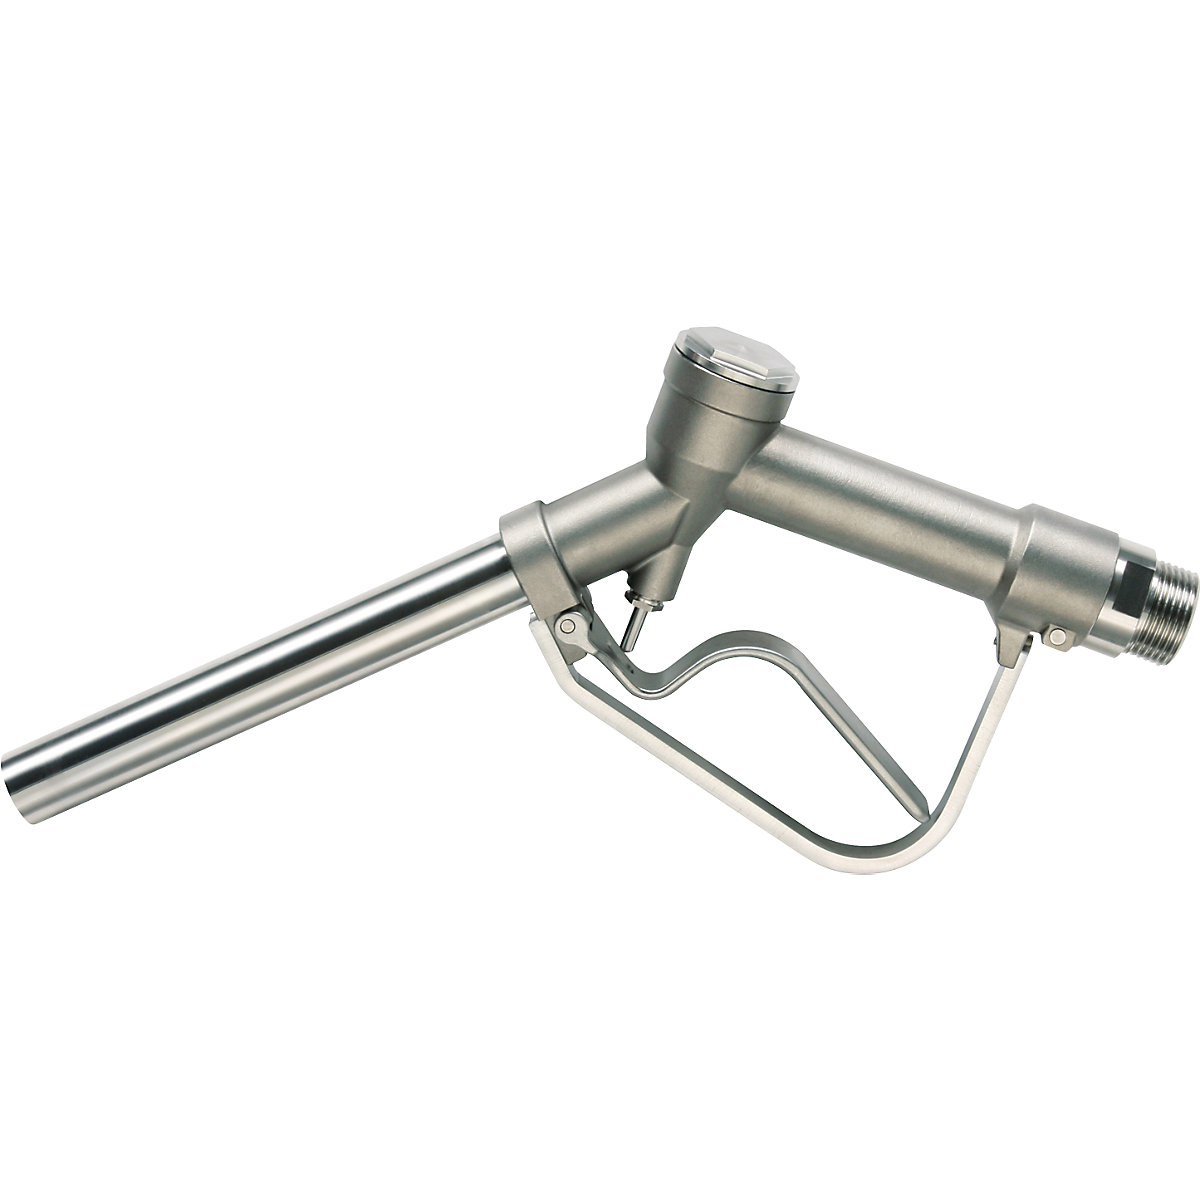 Manual pump pistol made of stainless steel 1.4571 – Jessberger